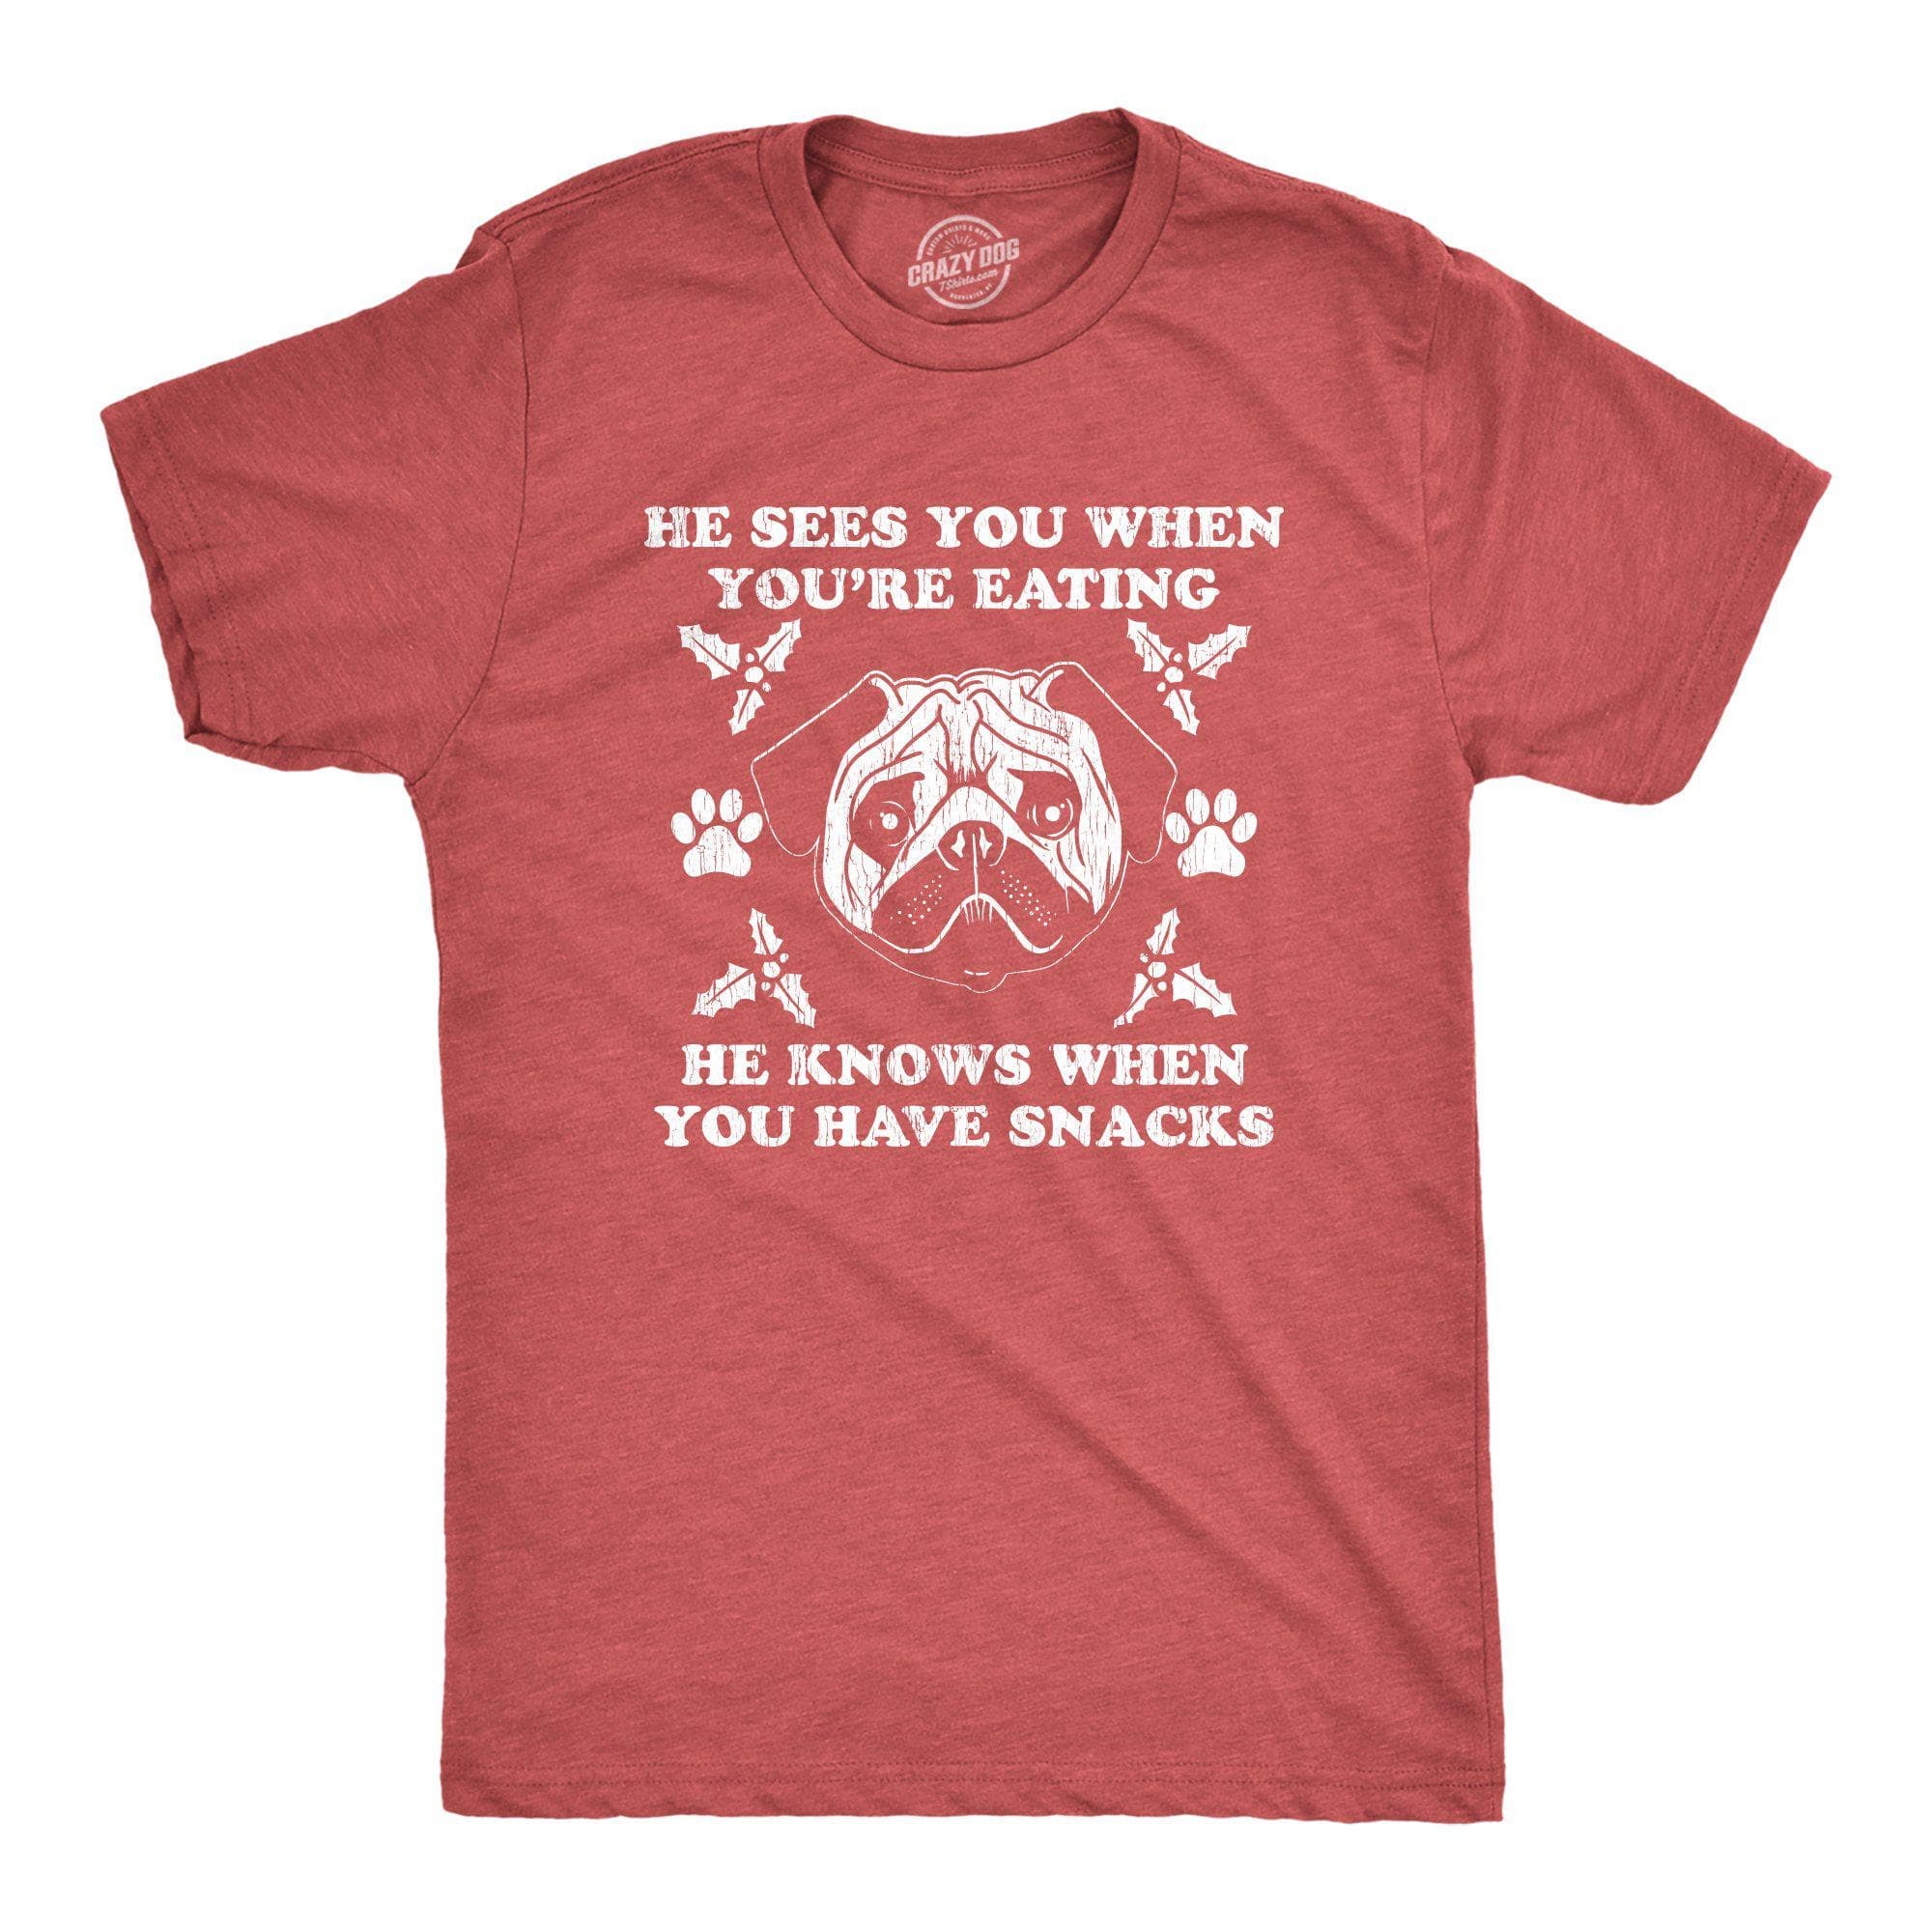 He Sees You When You're Eating Men's Tshirt - Crazy Dog T-Shirts